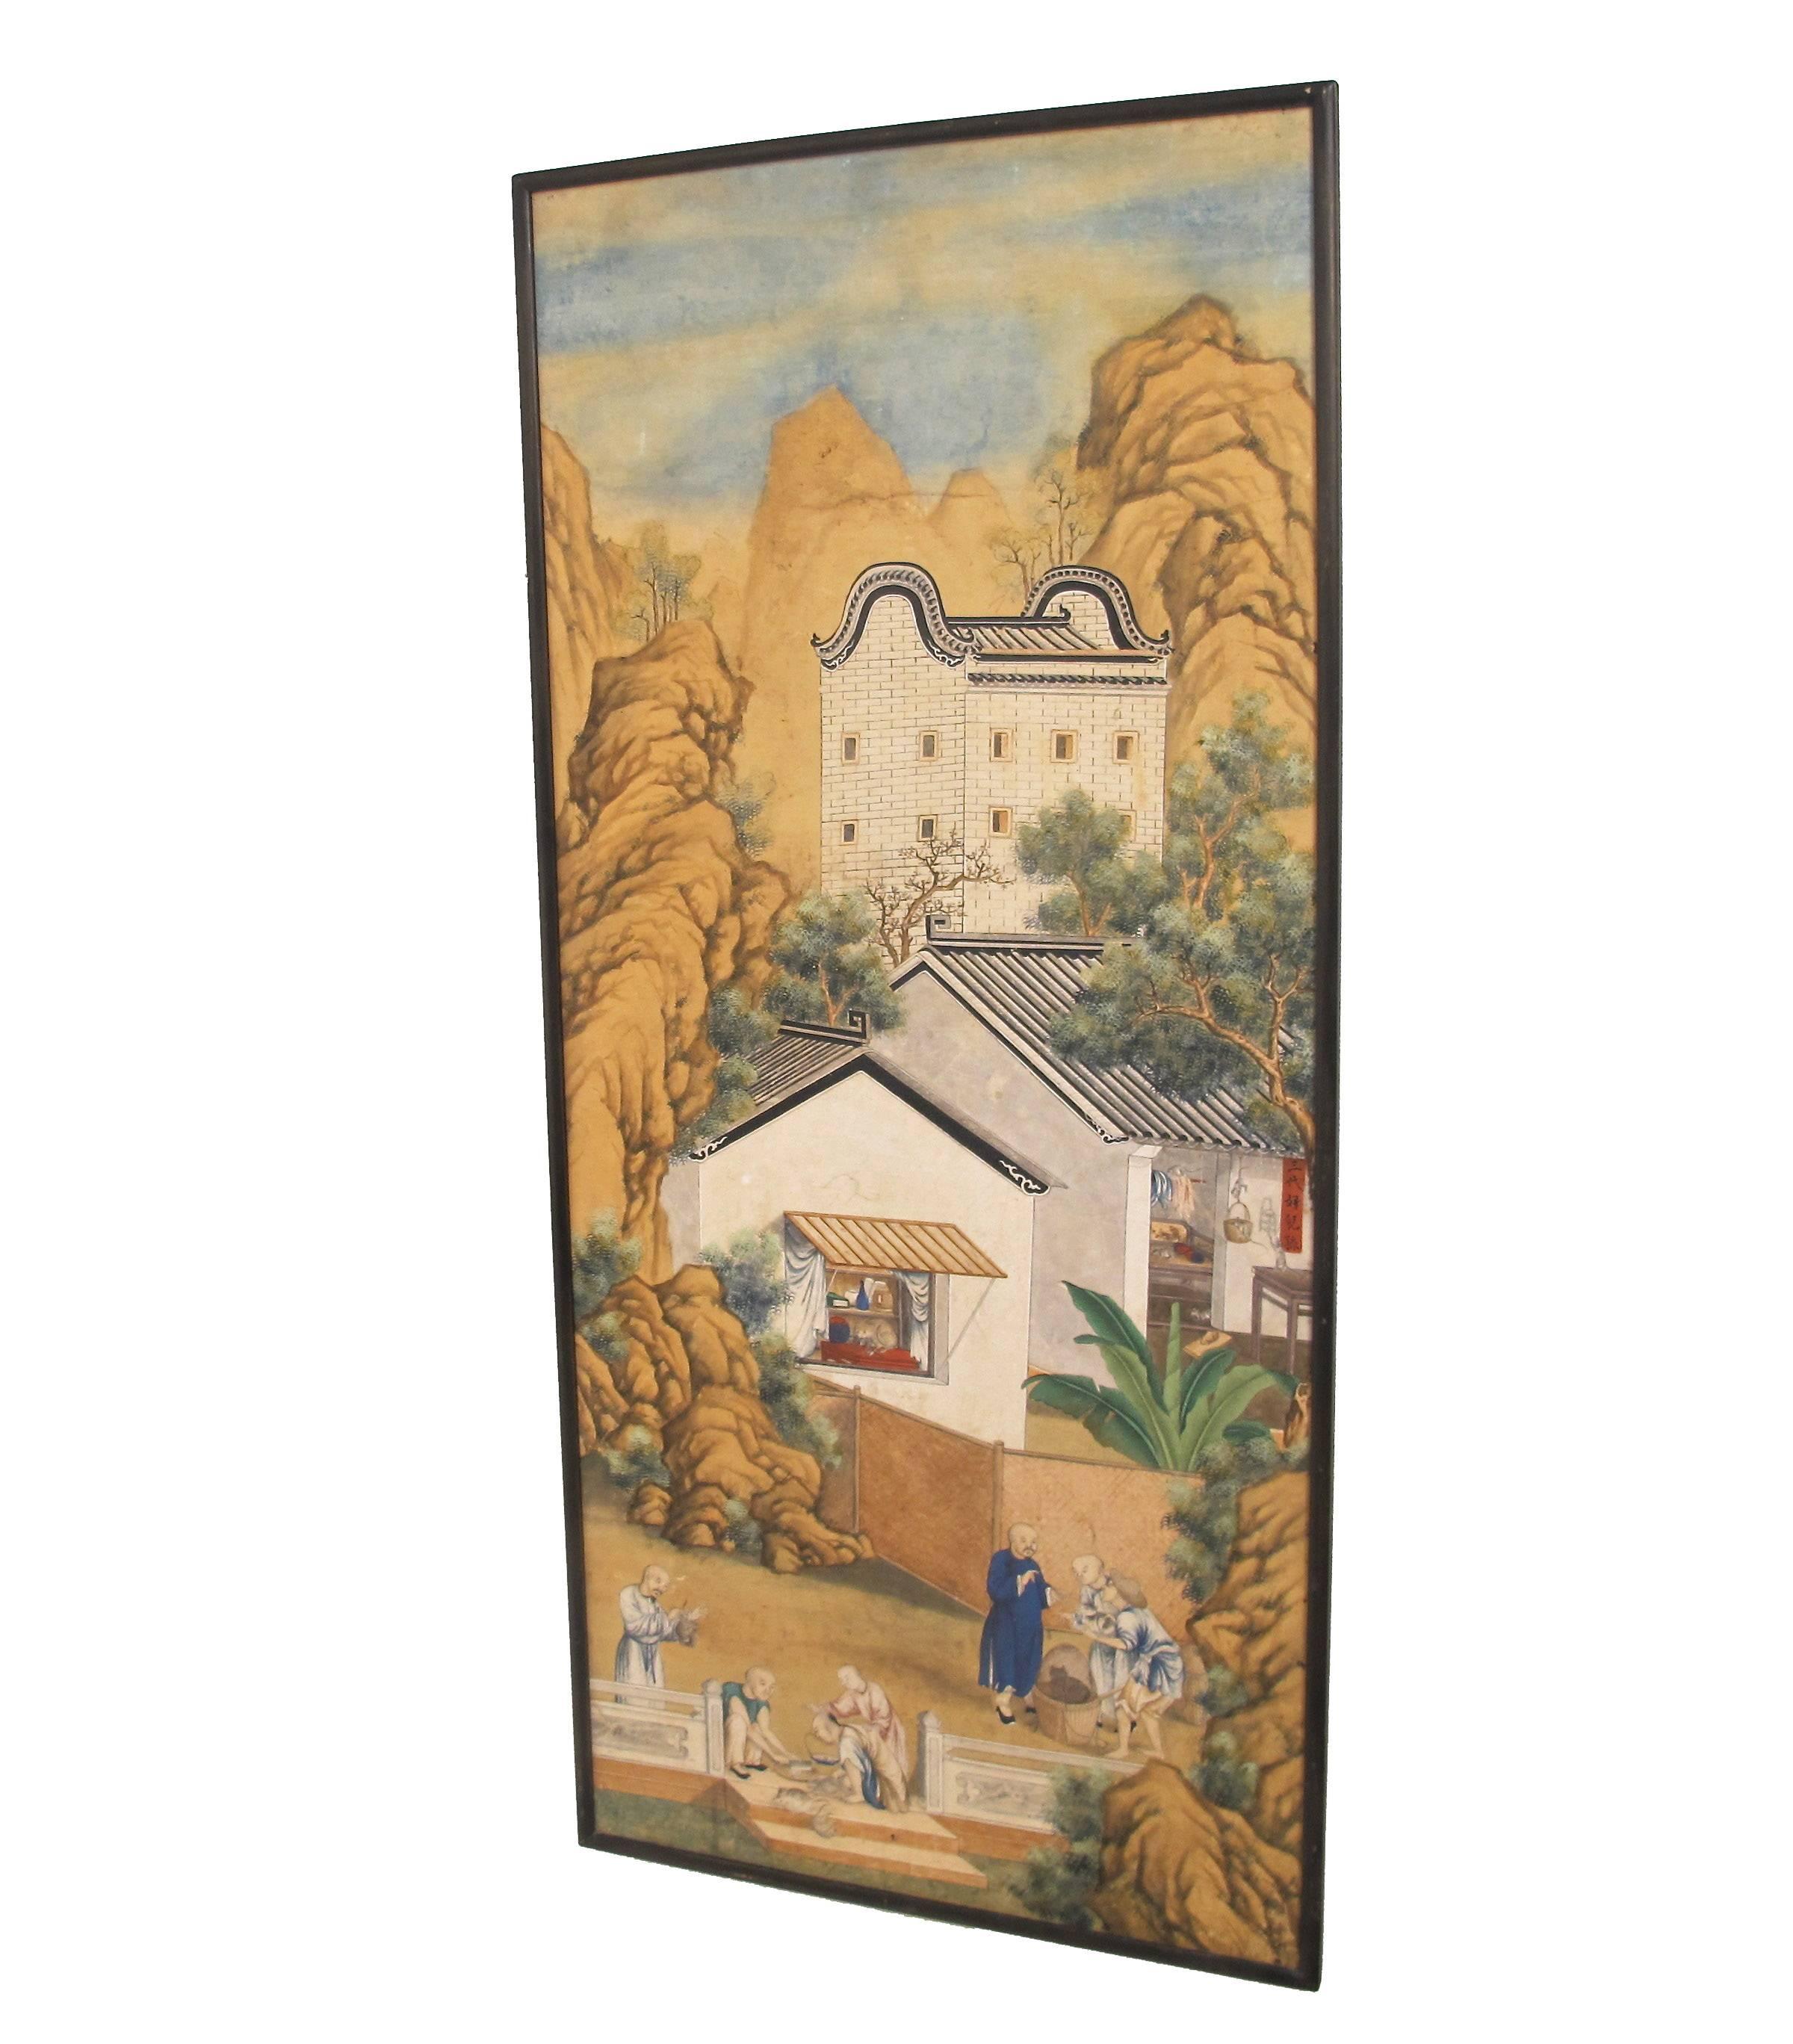 Hand-Painted 19th Century Chinese Watercolor Painting on Paper